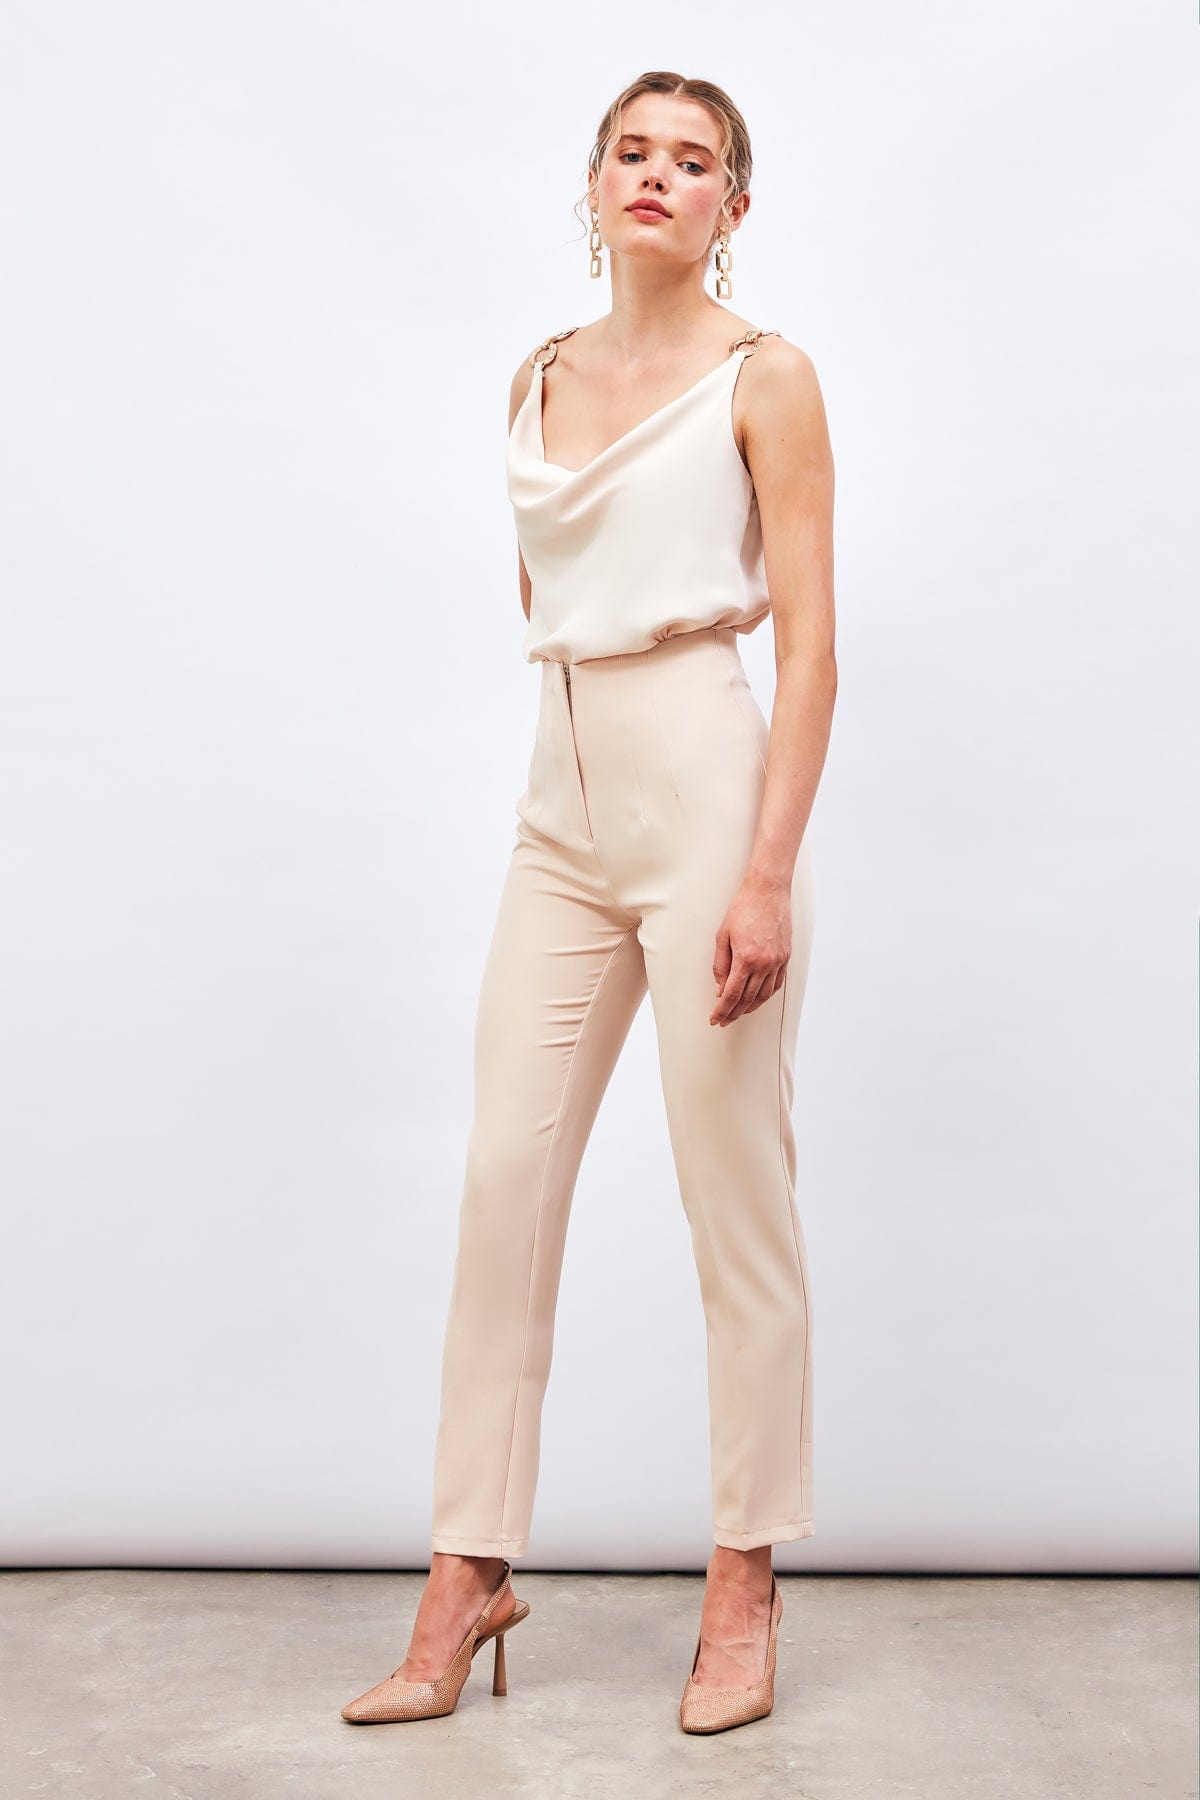 High Waist Collared Trousers ZEFASH